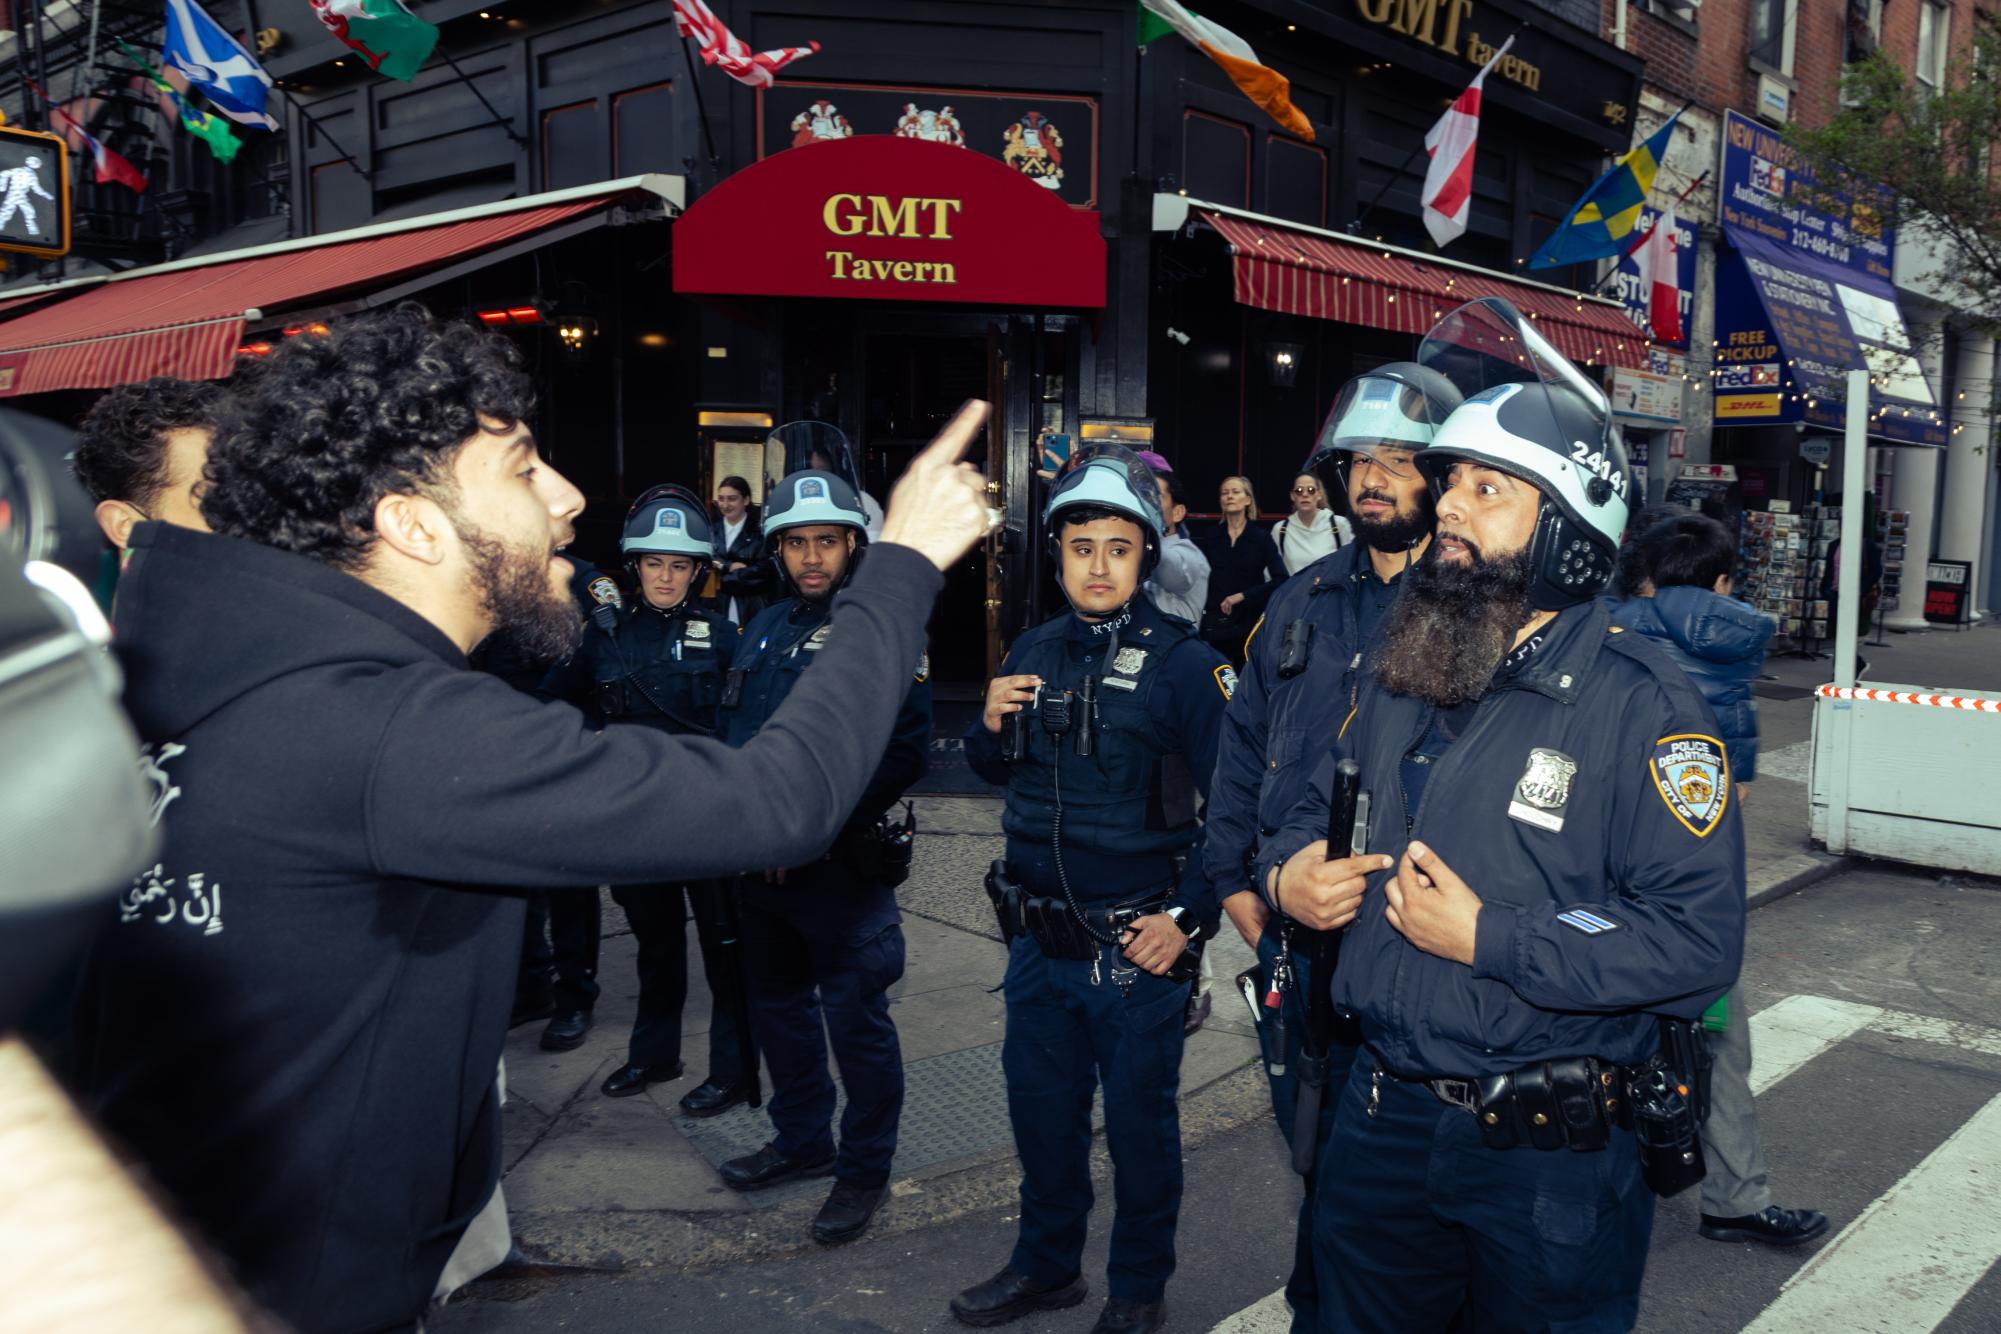 A protester confronts a police officer.